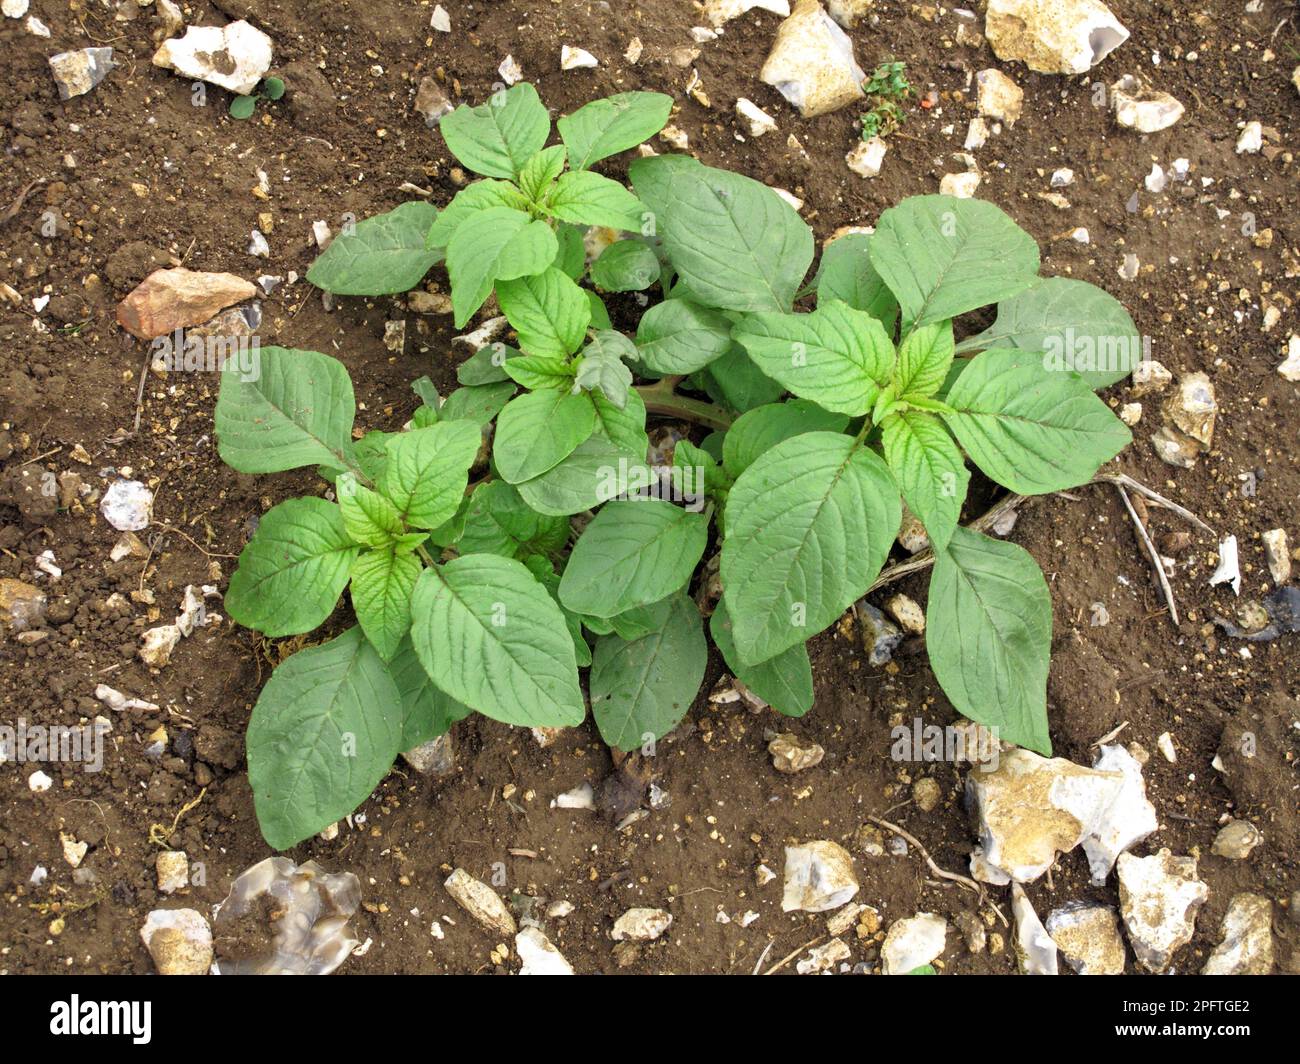 Common amaranth (Amaranthus), red-rooted pigweed retroflexus, young plant on waste agricultural land Stock Photo